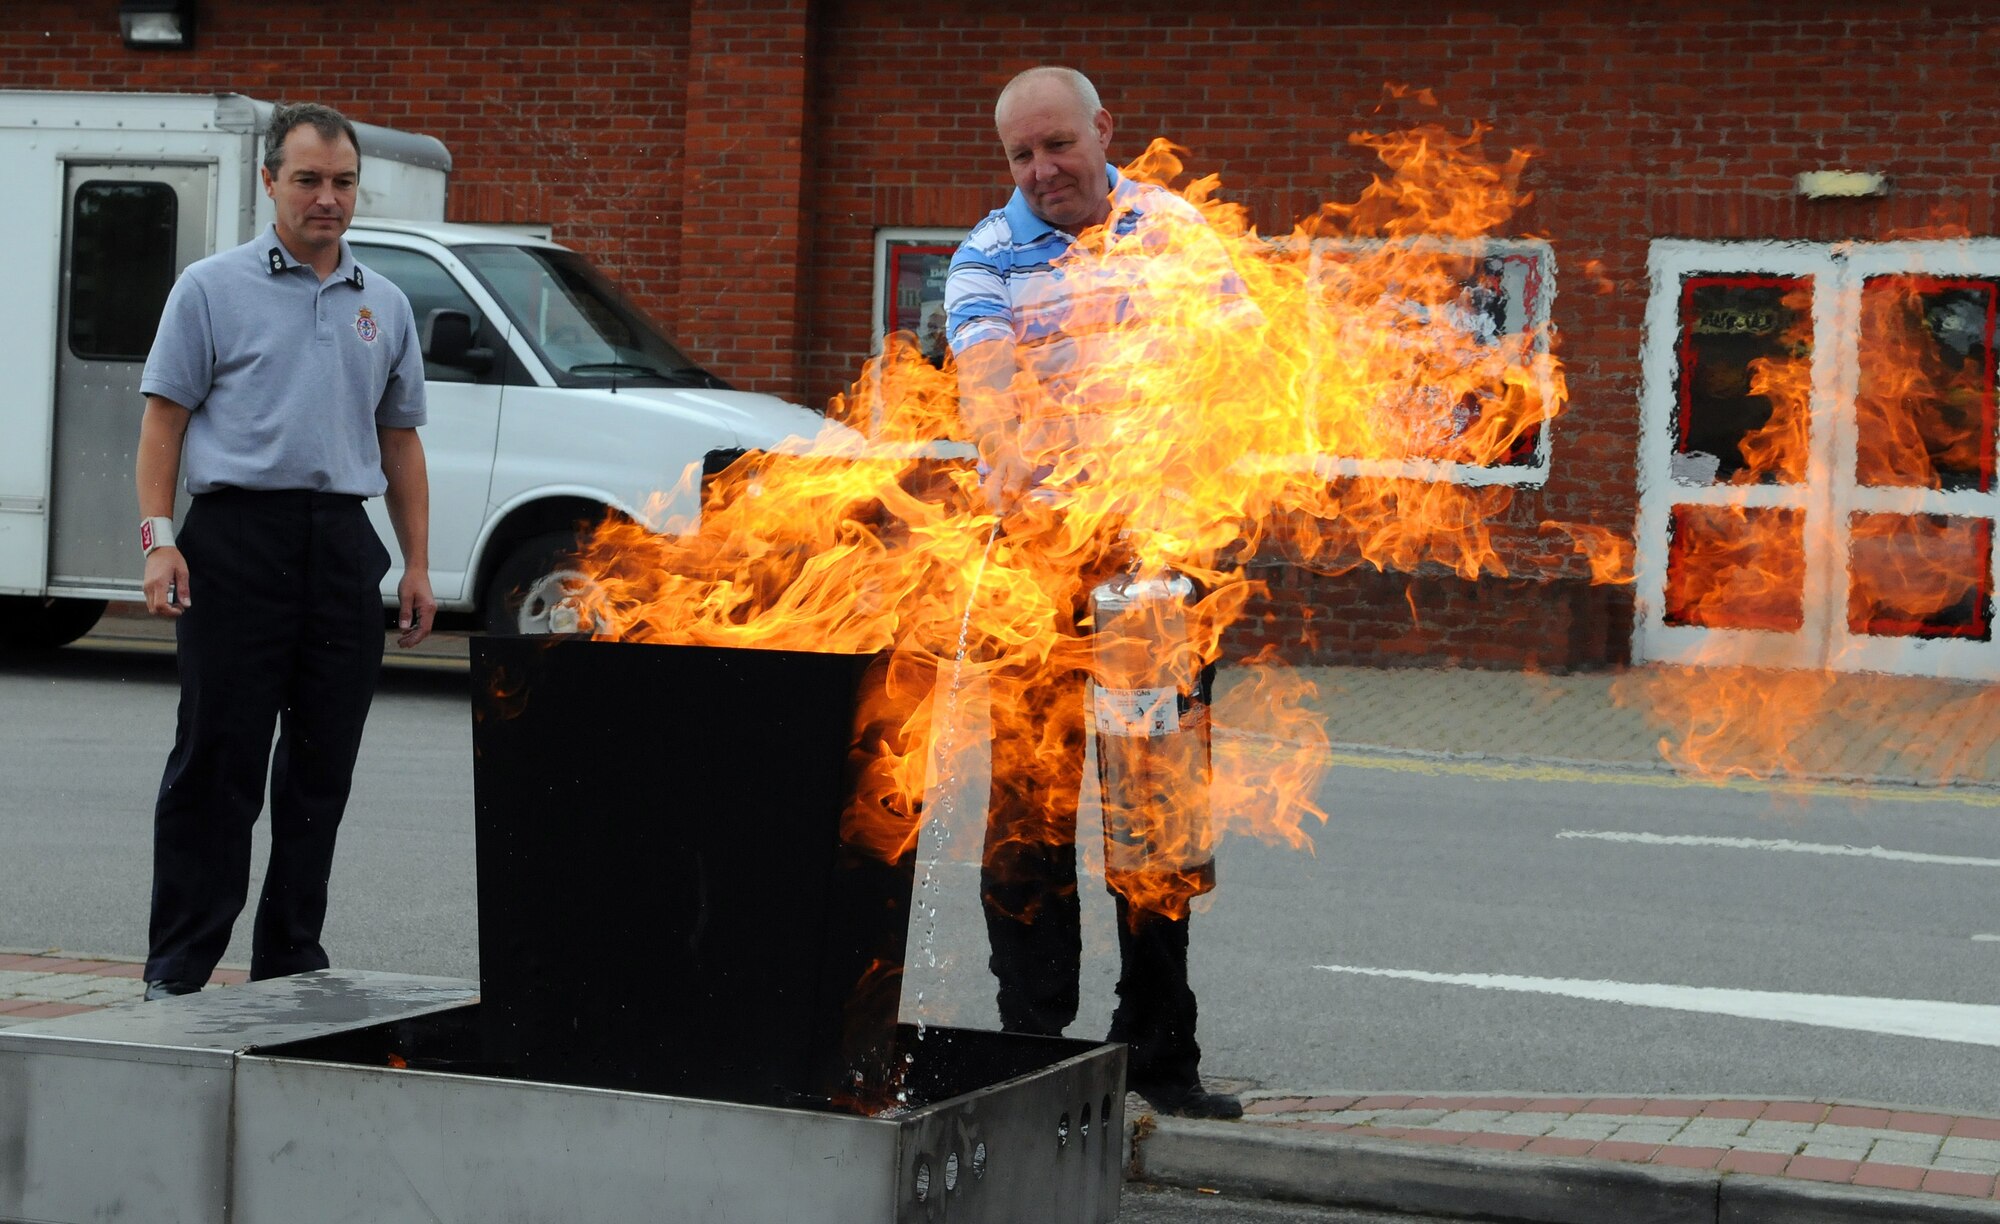 RAF MILDENHALL, England -- Clive Langford, a Base Exchange concessionaire, practices using a fire extinguisher while being observed by his instructor Adrian Delaney, RAF Mildenhall Fire Department watch manager, outside the BX July 15. The fire department taught concessionaires from RAFs Mildenhall and Lakenheath to use the PASS method to put out small fires when it is safe to do so. This technique involves pulling the extinguisher pin, aiming at the base of the fire, squeezing the extinguisher handle and sweeping from side to side until the fire is out. (U.S. Air Force photo/Staff Sgt. Thomas Trower)